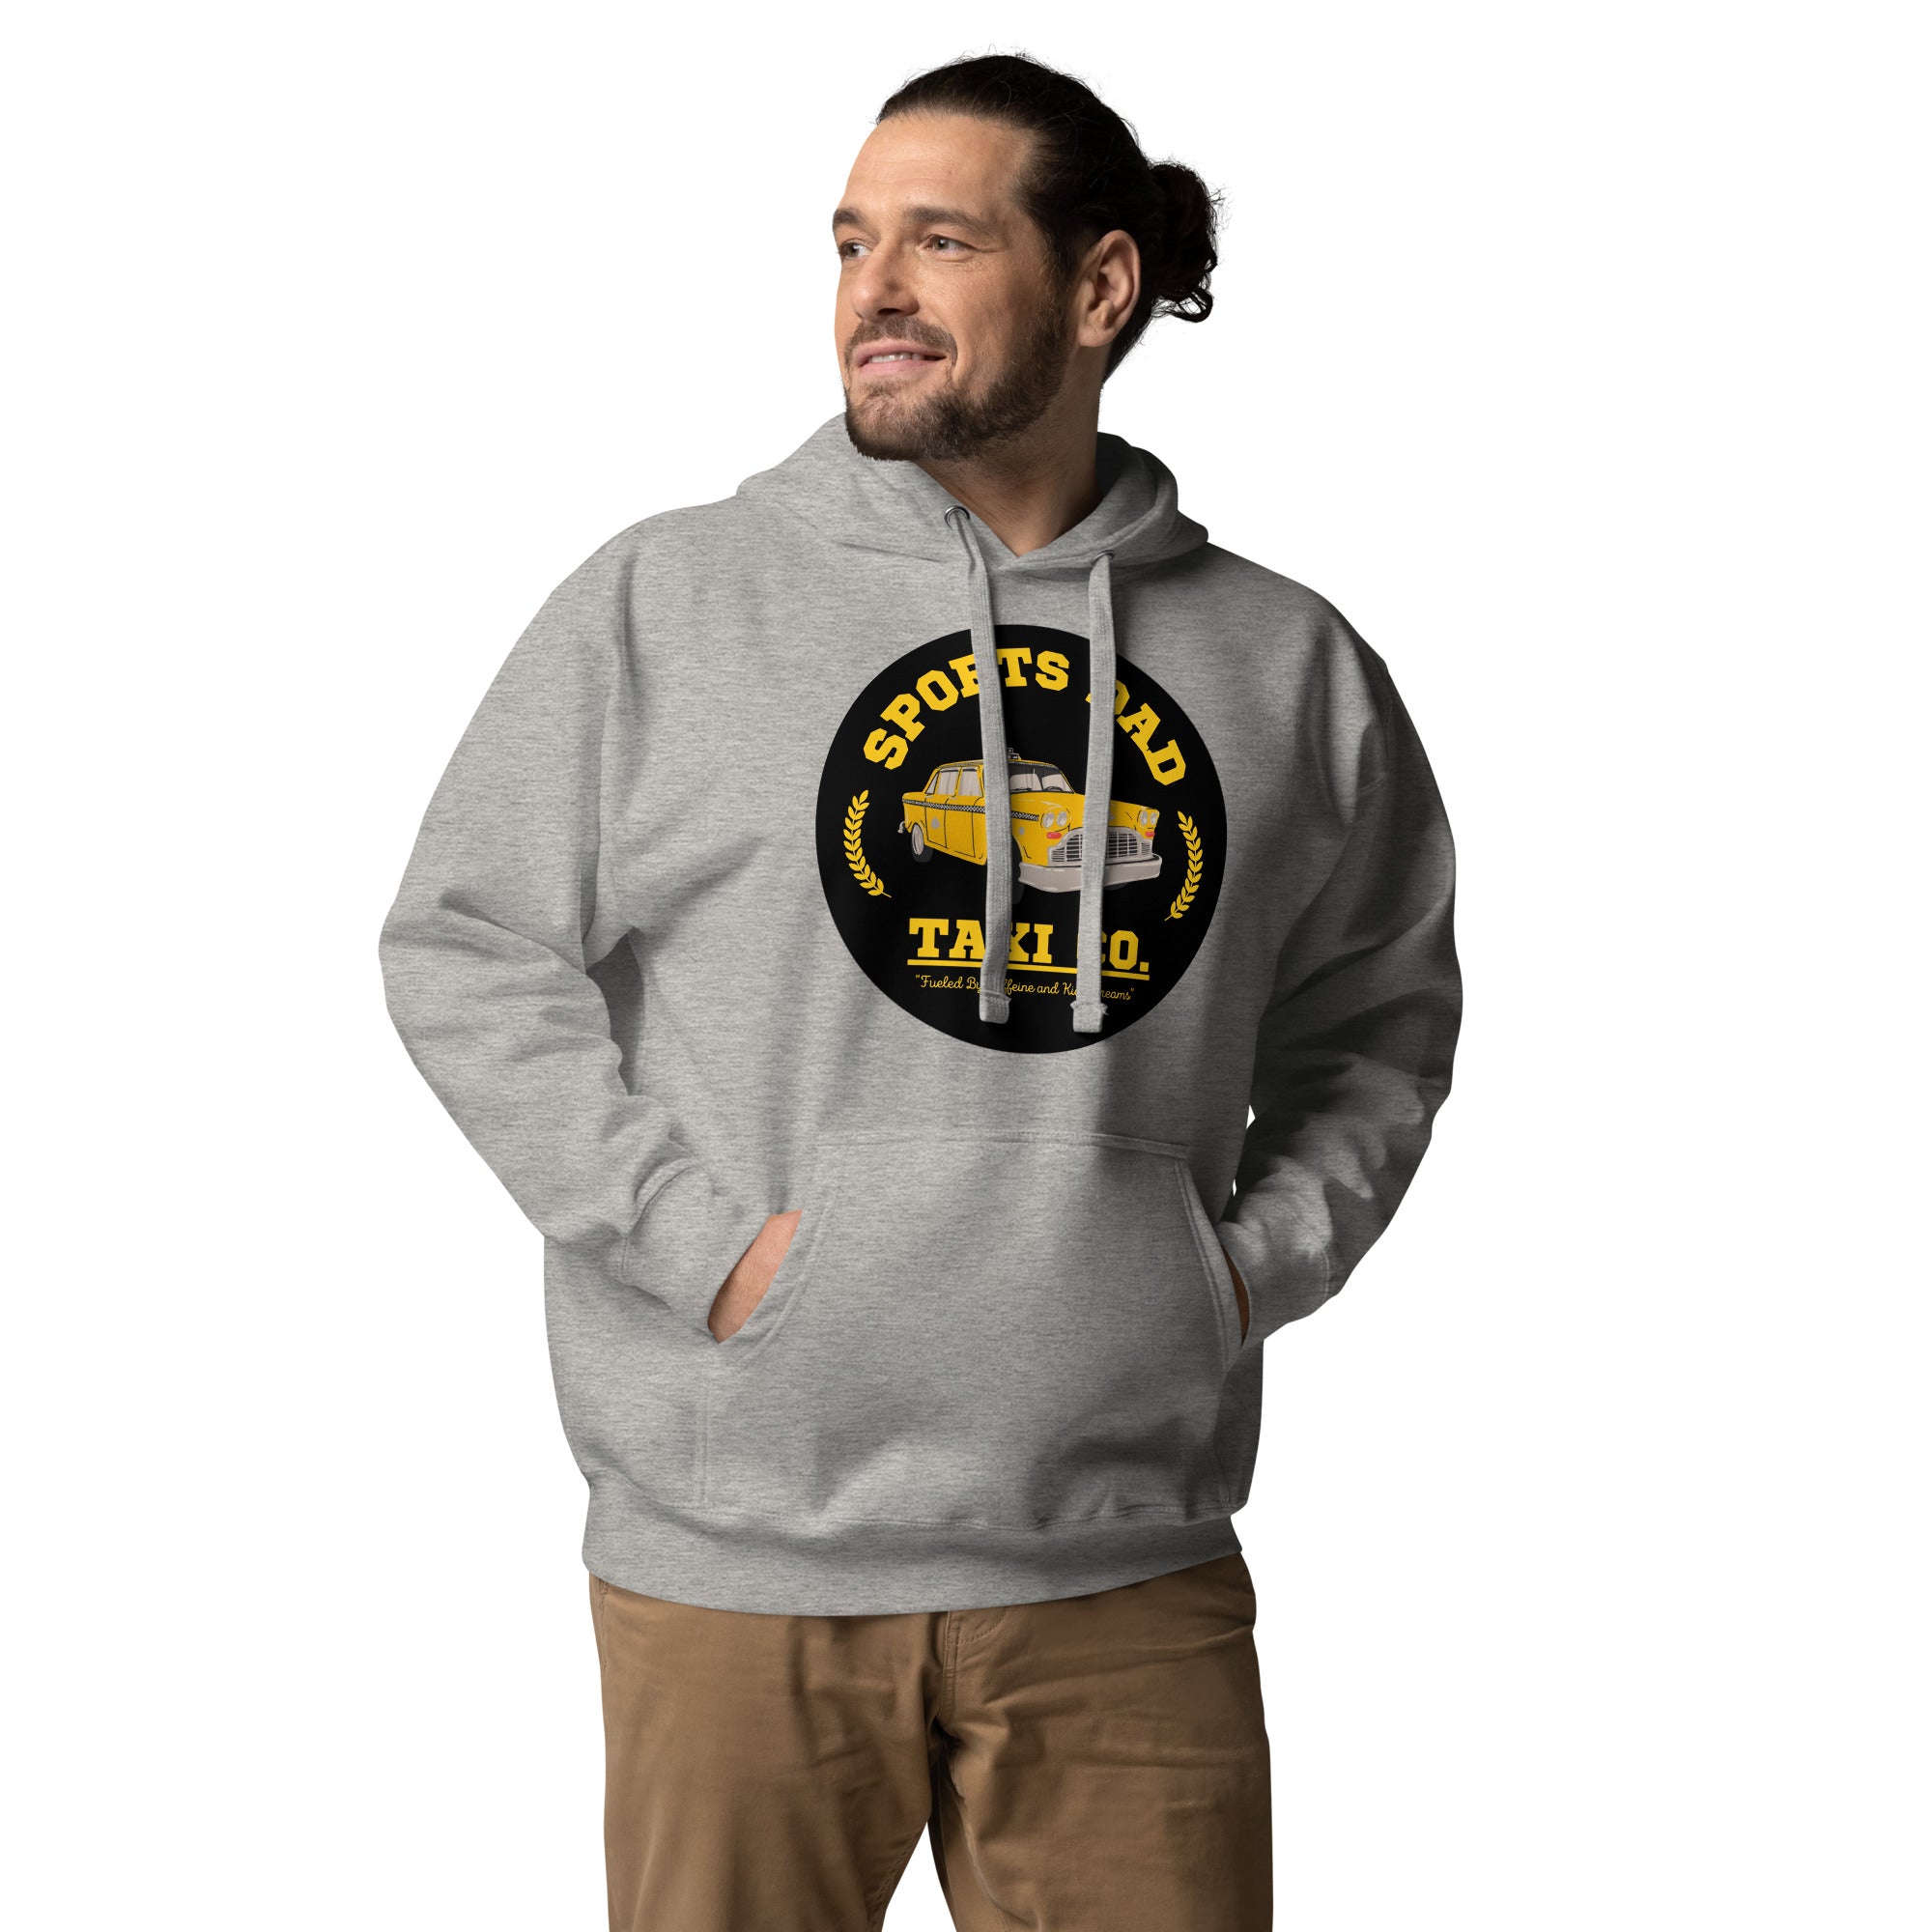 The Sports Dad Taxi Co. Original Heavy Hoodie